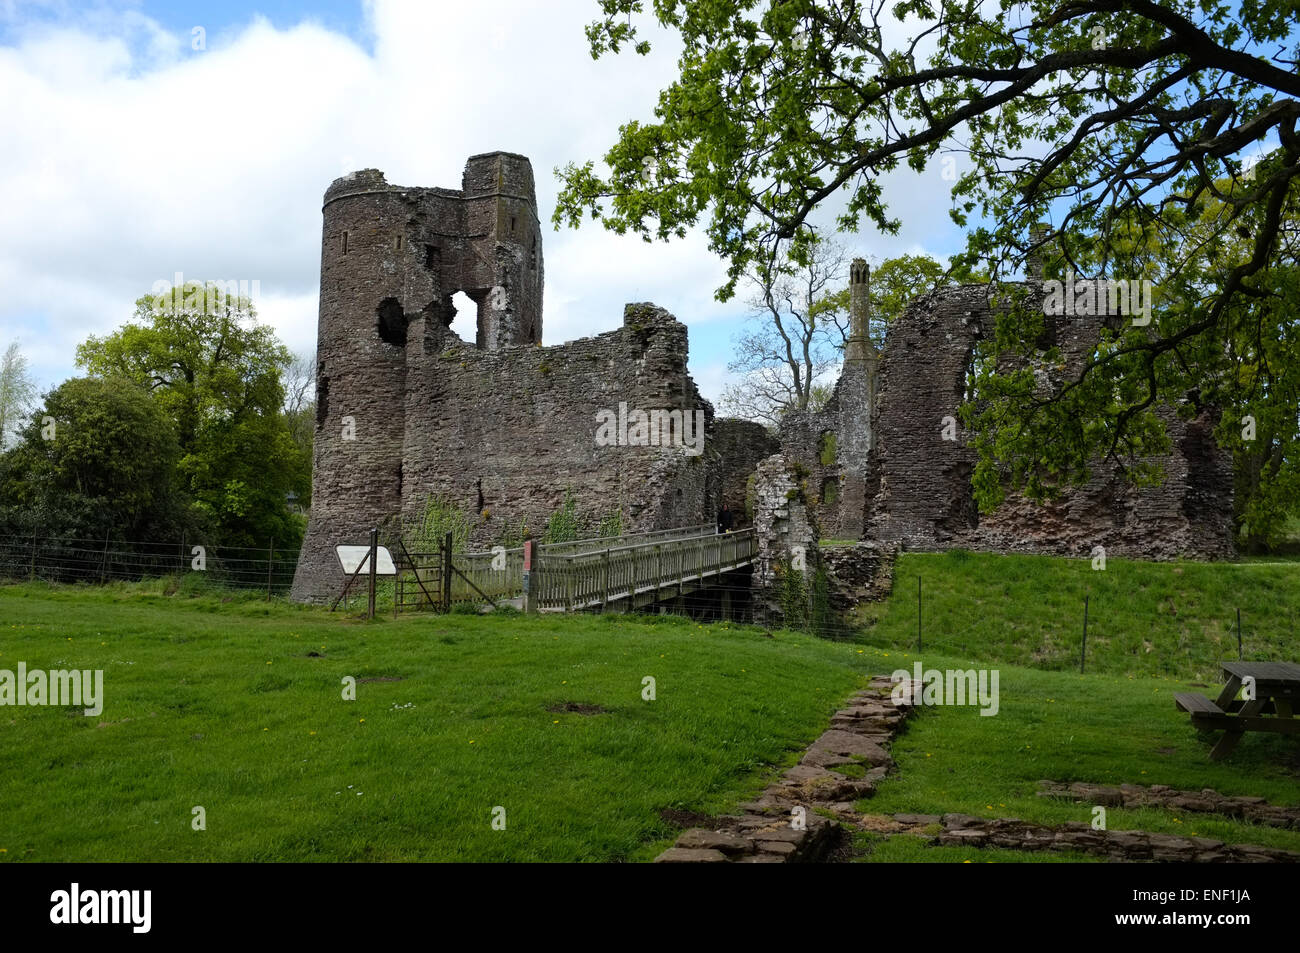 Exterior view of Grosmont Norman Castle, Grosmont, Abergavenny, Gwent Wales UK Stock Photo